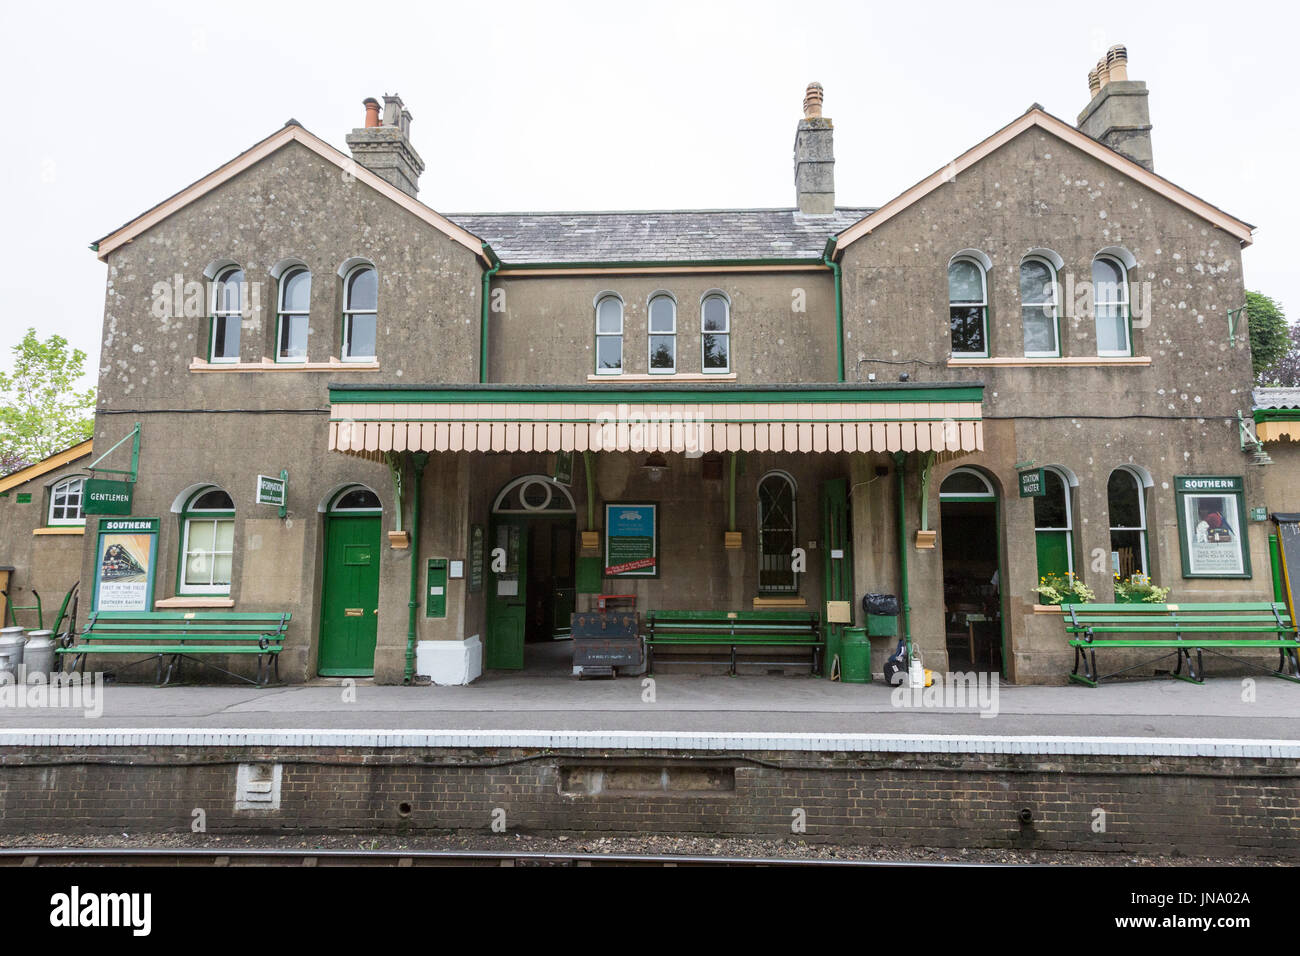 Alresford railway station in Hampshire, England, is the terminus of the Watercress Line from Alton. Stock Photo